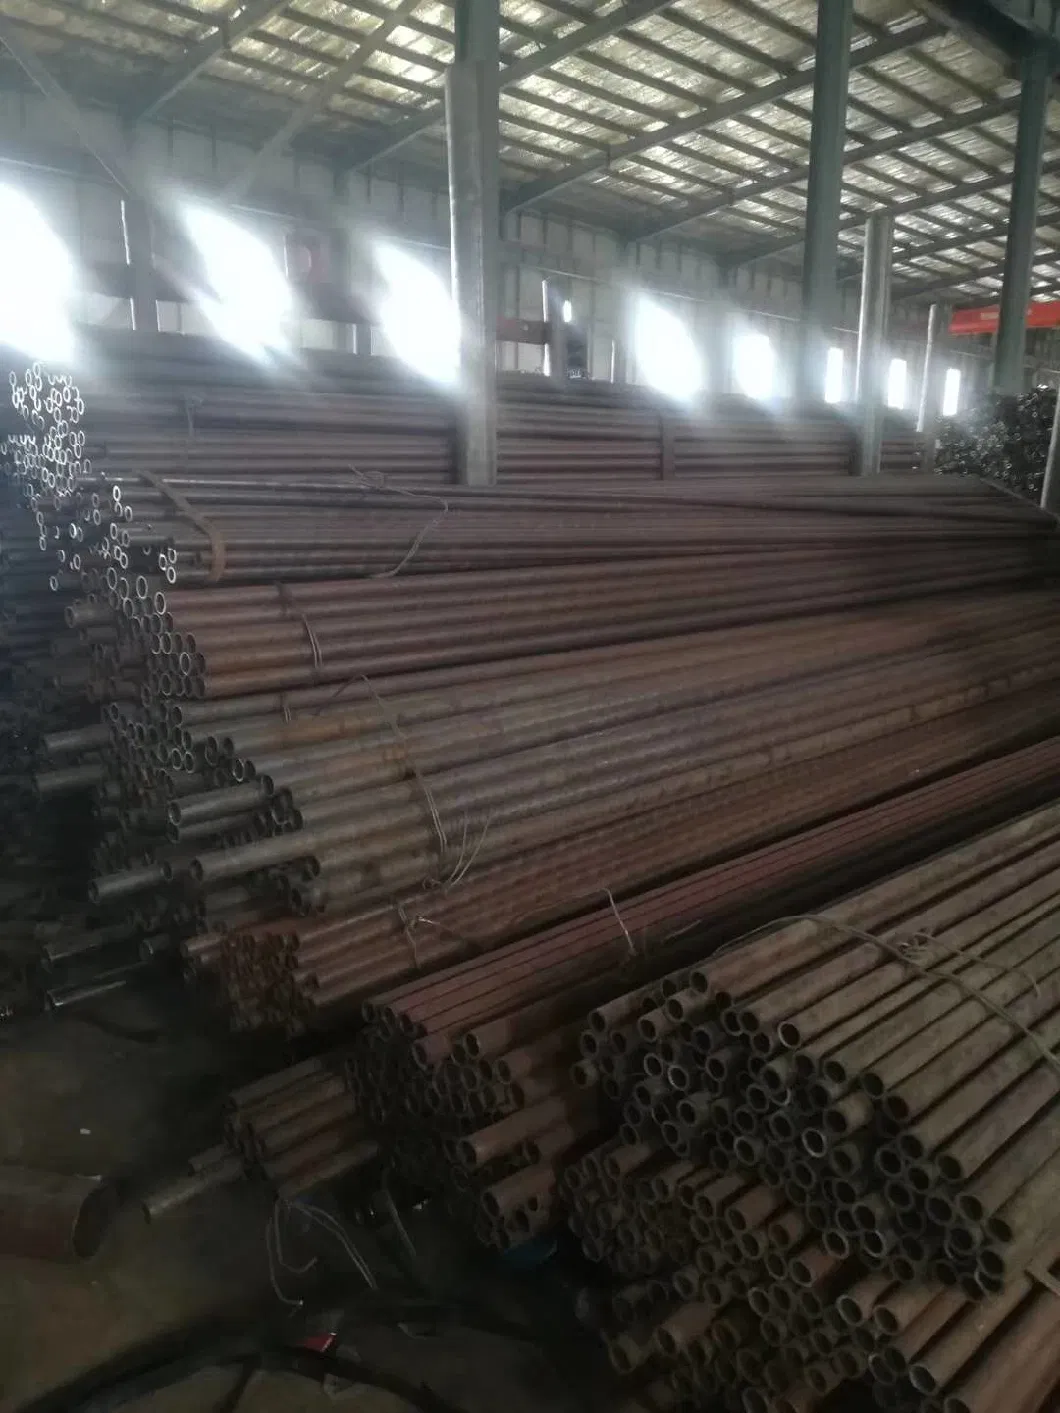 As1163 C350/API 5L X42/ERW Carbon Steel Pipe